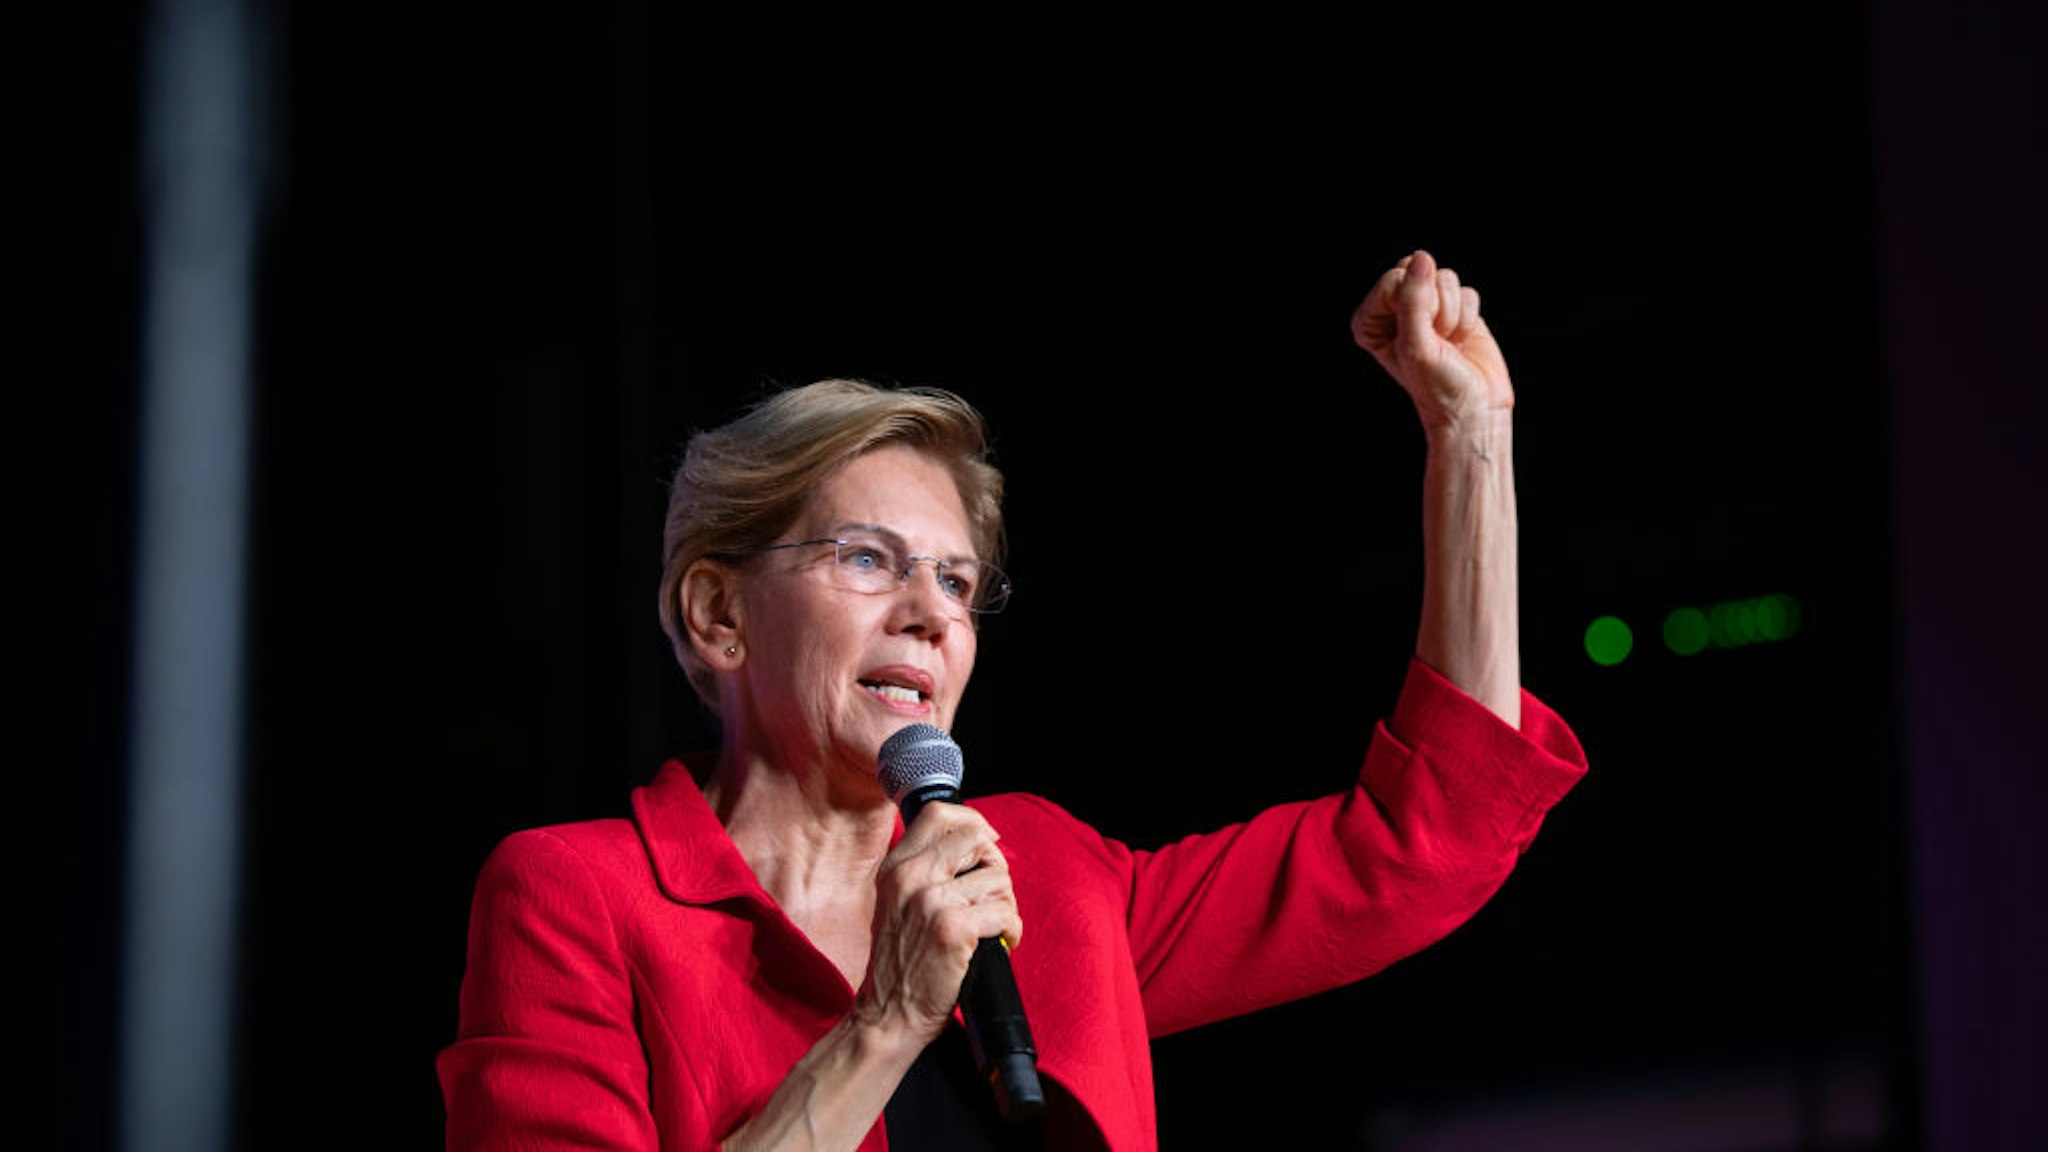 Senator Elizabeth Warren, a Democrat from Massachusetts and 2020 presidential candidate, speaks during the Second Step Presidential Justice Forum at Benedict College in Columbia, South Carolina, U.S., on Sunday, Oct. 27, 2019.